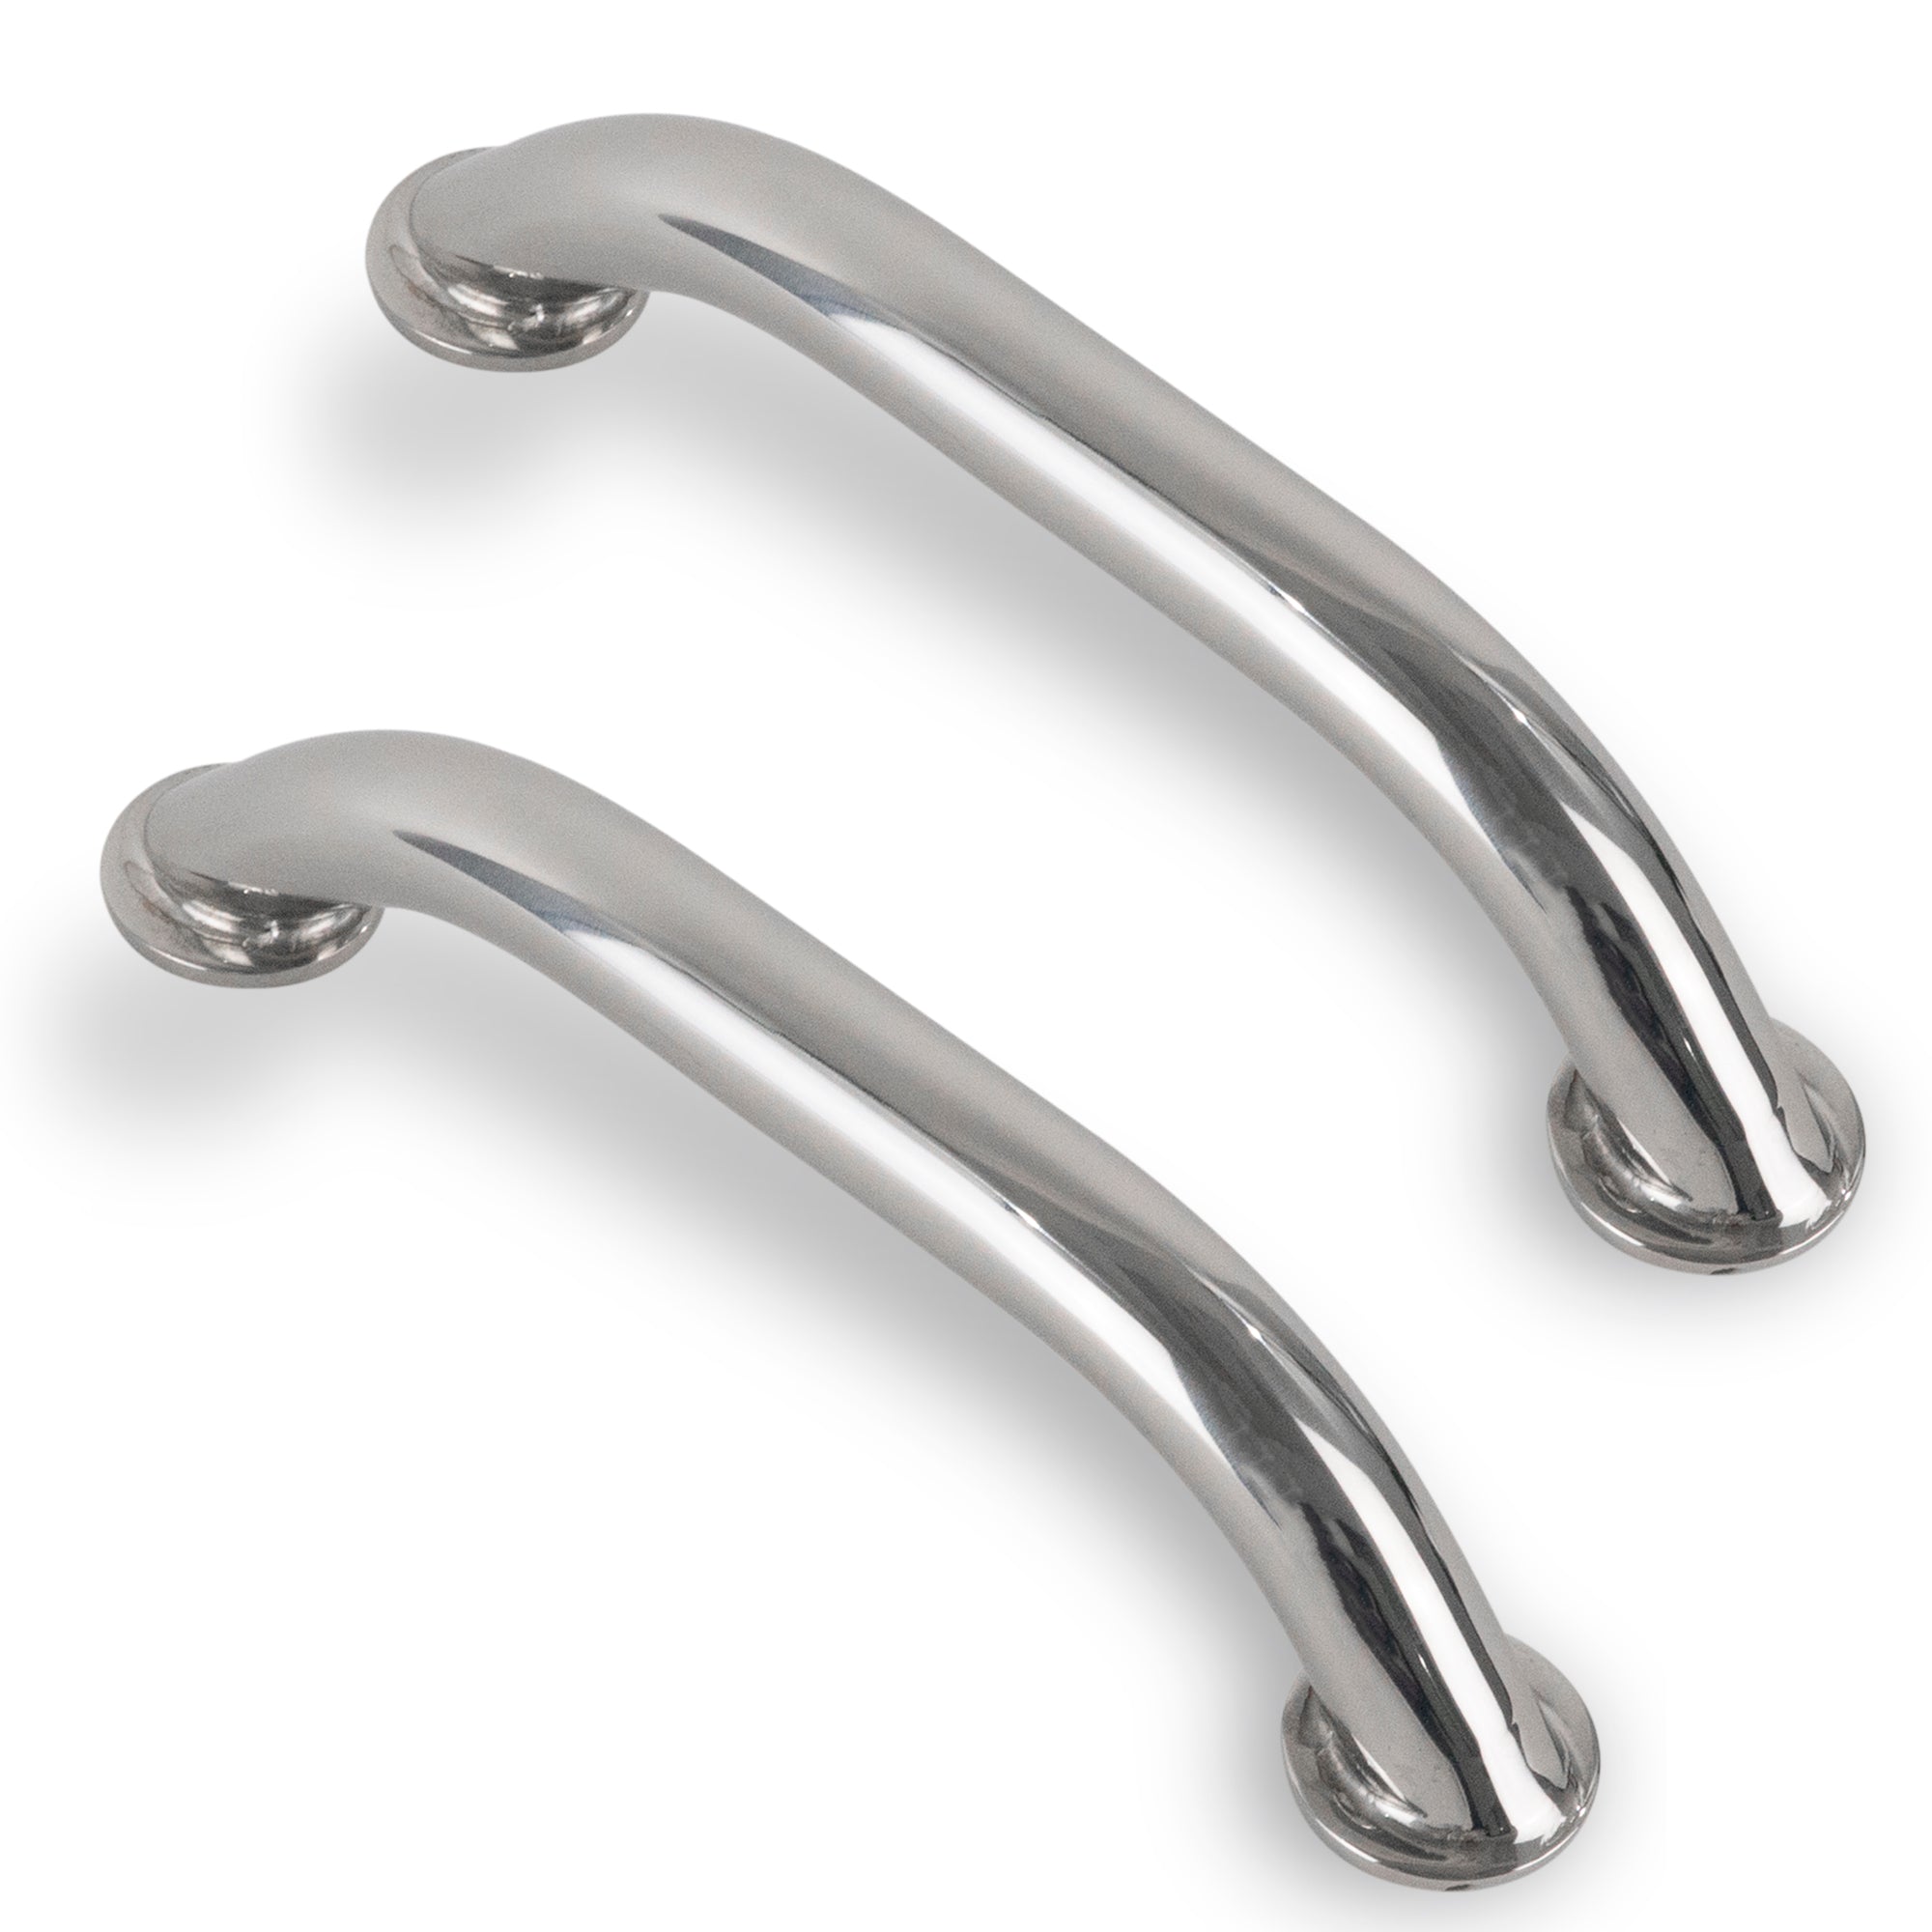 Boat Grab Handle, 9" Stainless Steel 2-Pack - FO577-M2